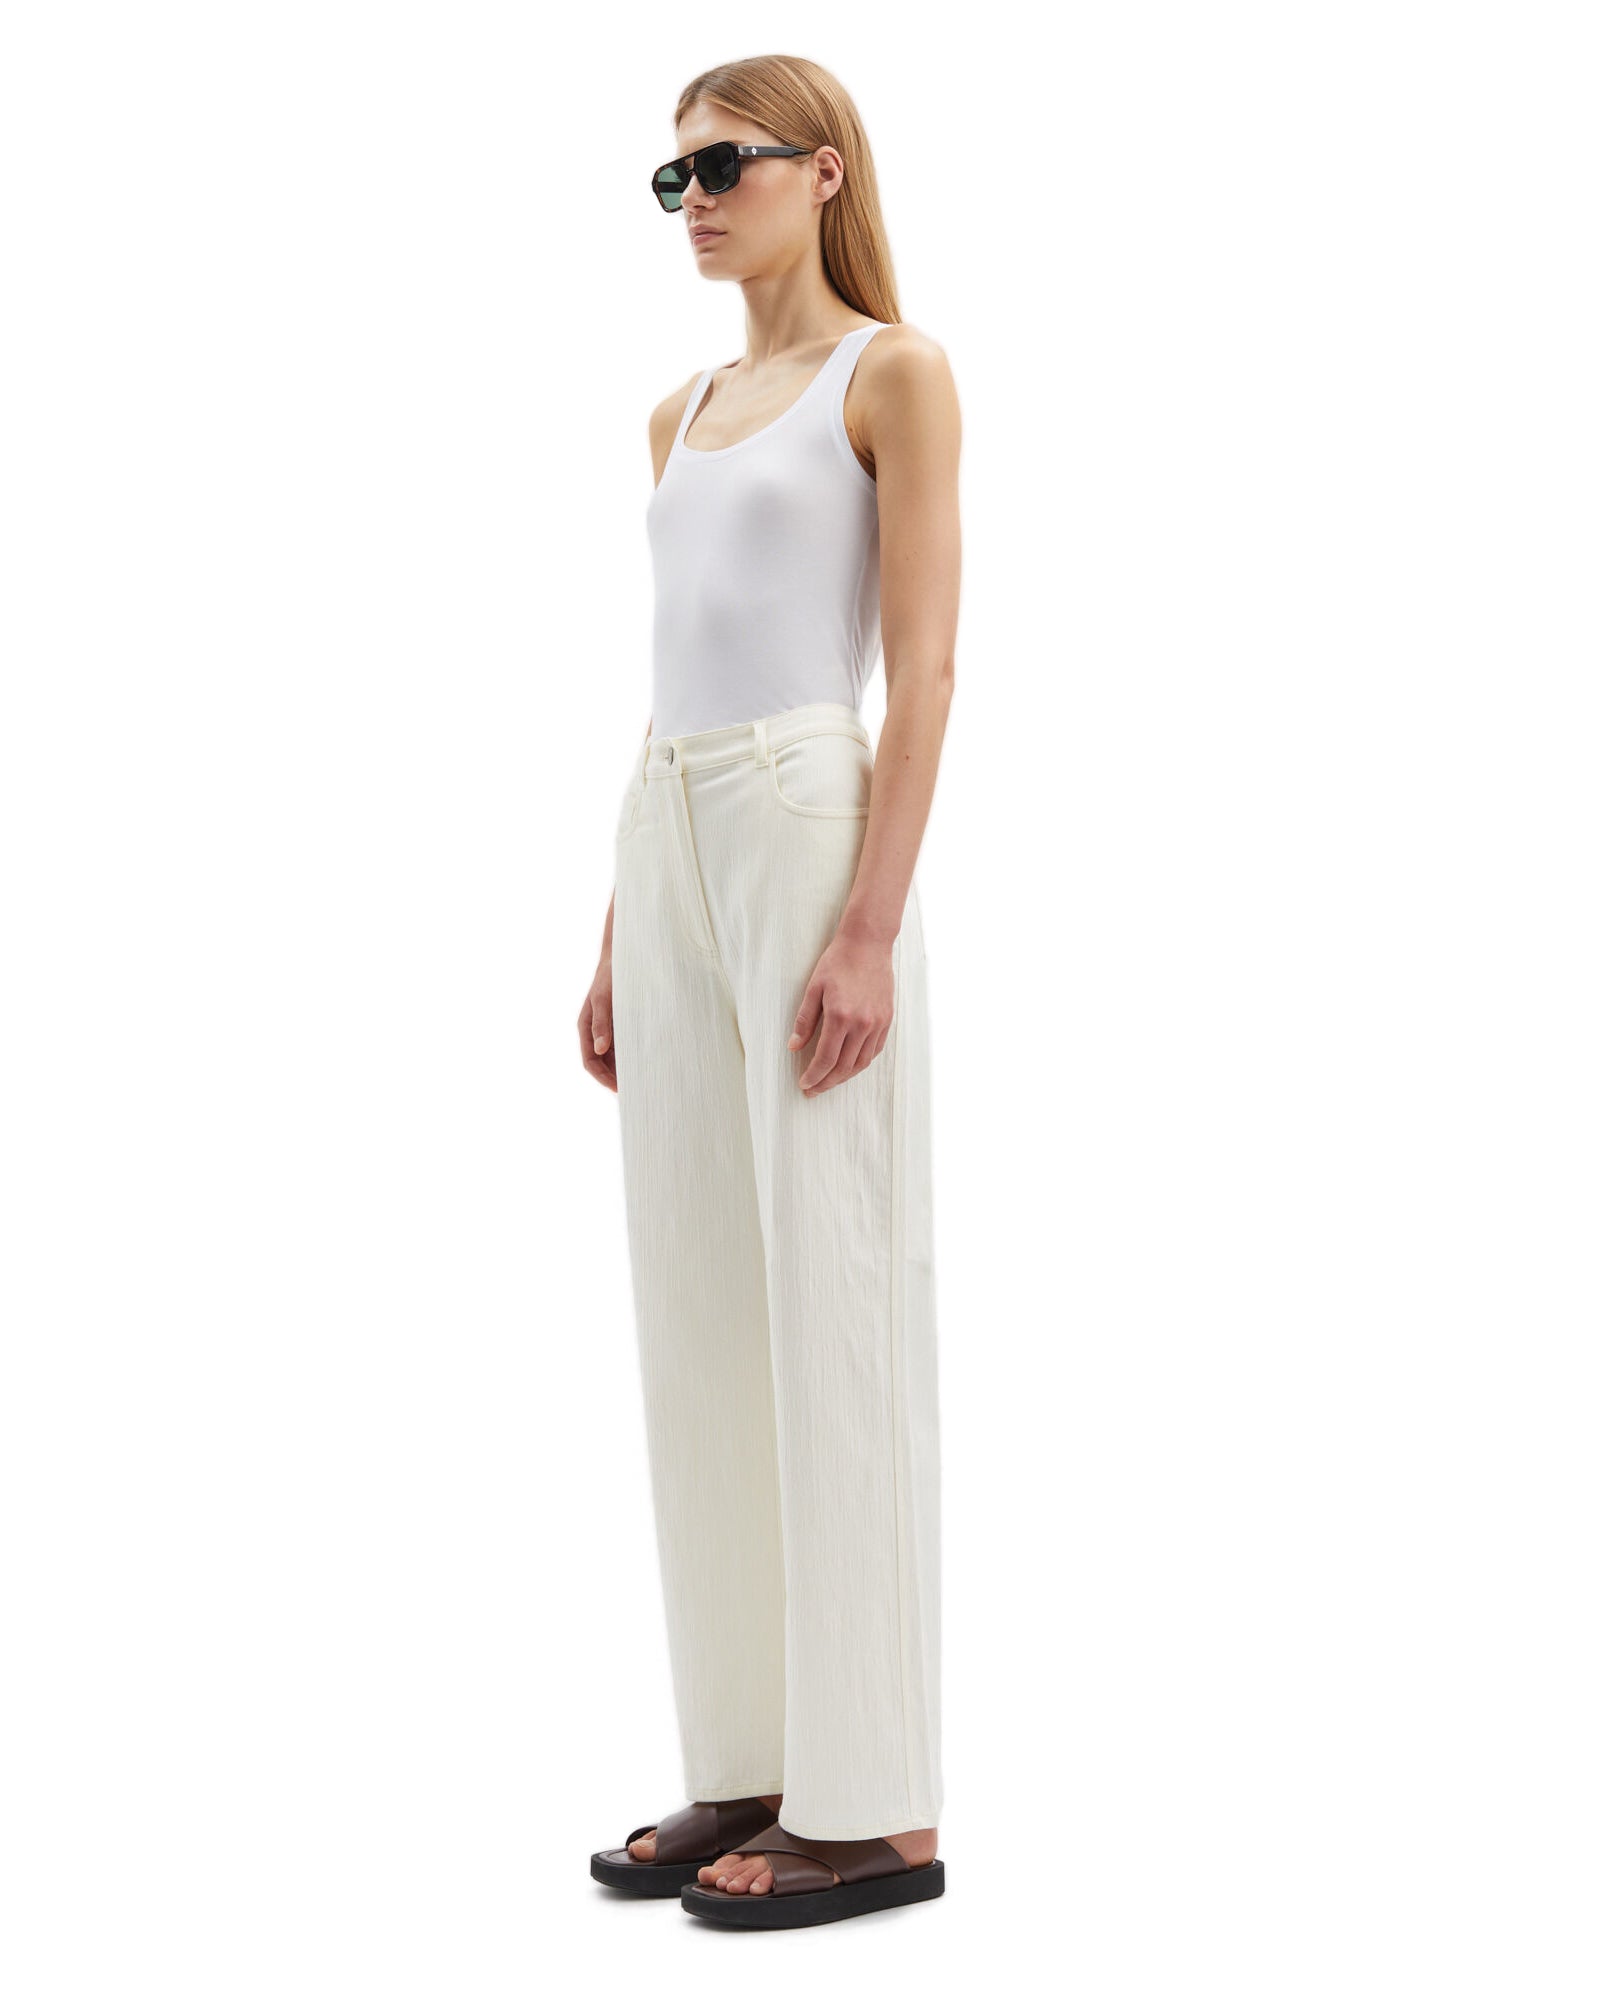 Sashelly 15127 Trousers - Solitary Star